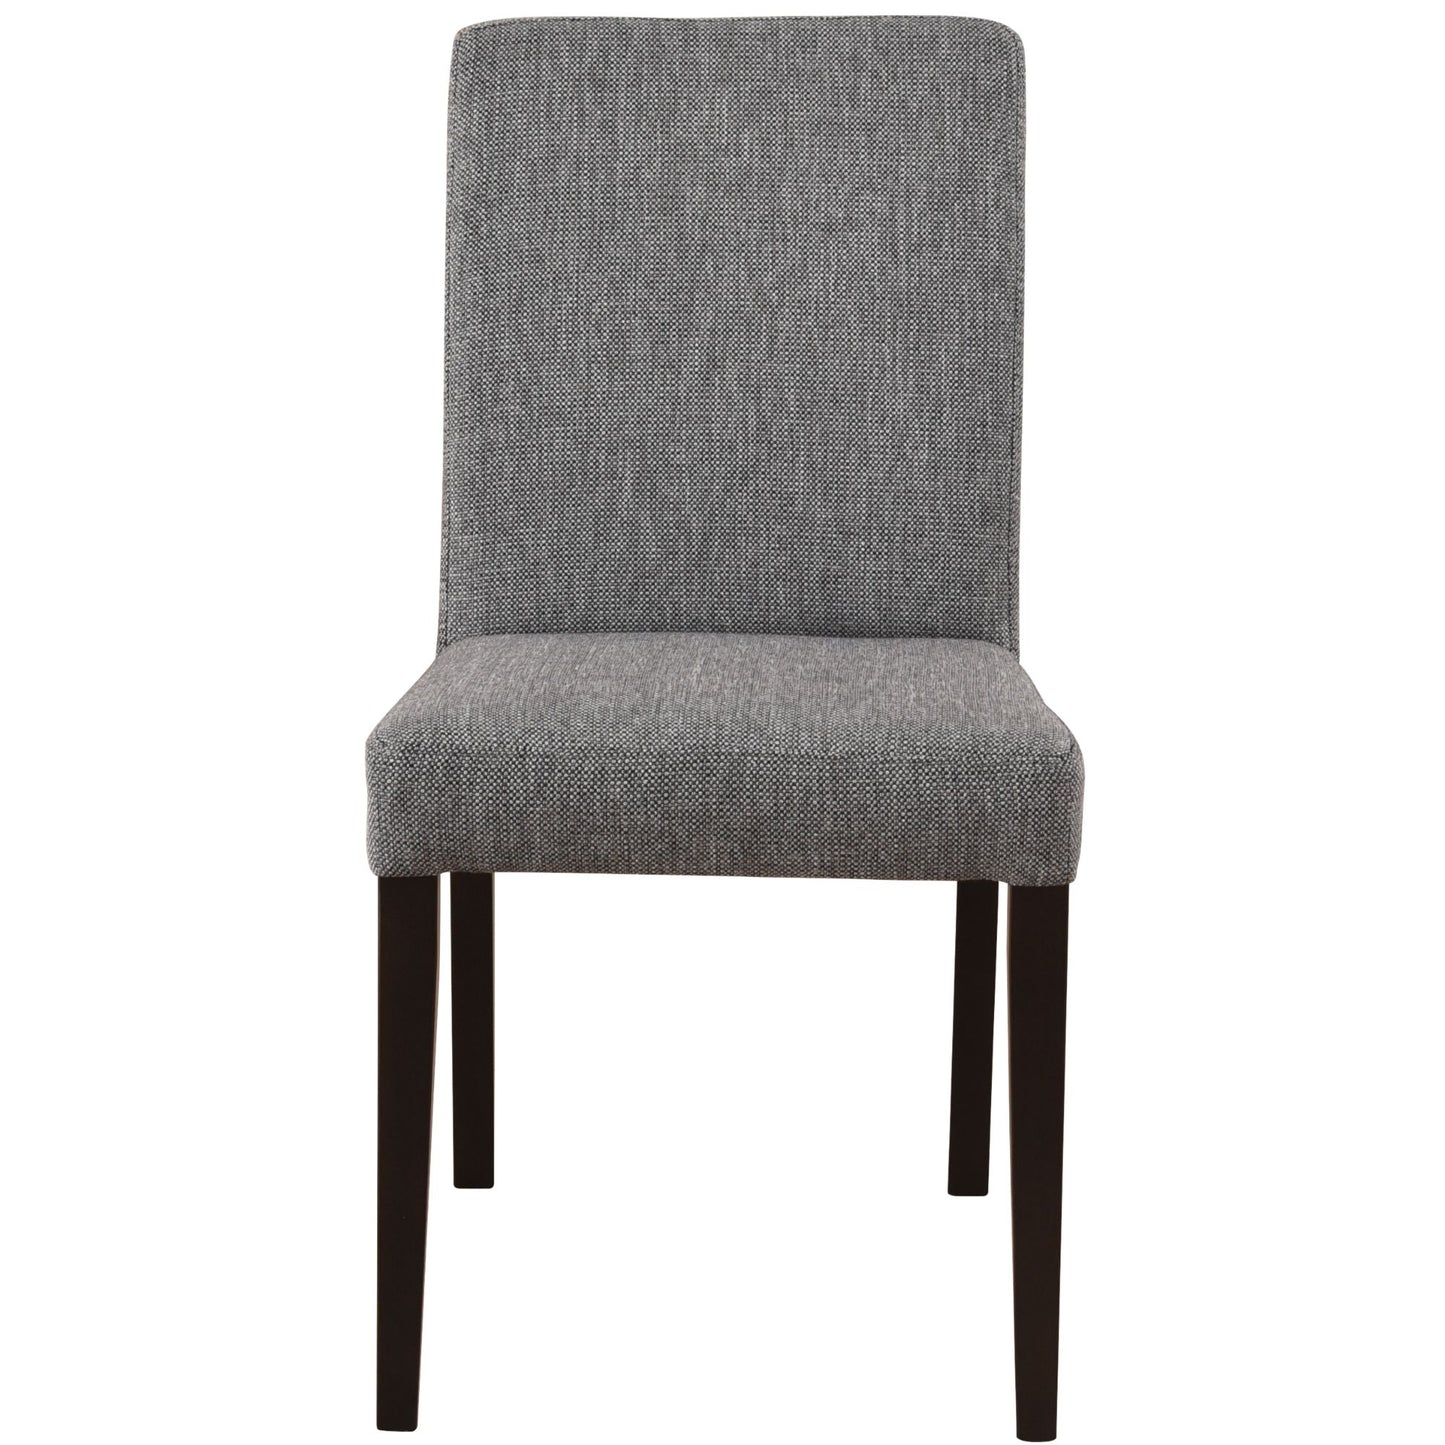 Set of 6 Fabric Upholstered Solid Wood Dining Chairs - Granite